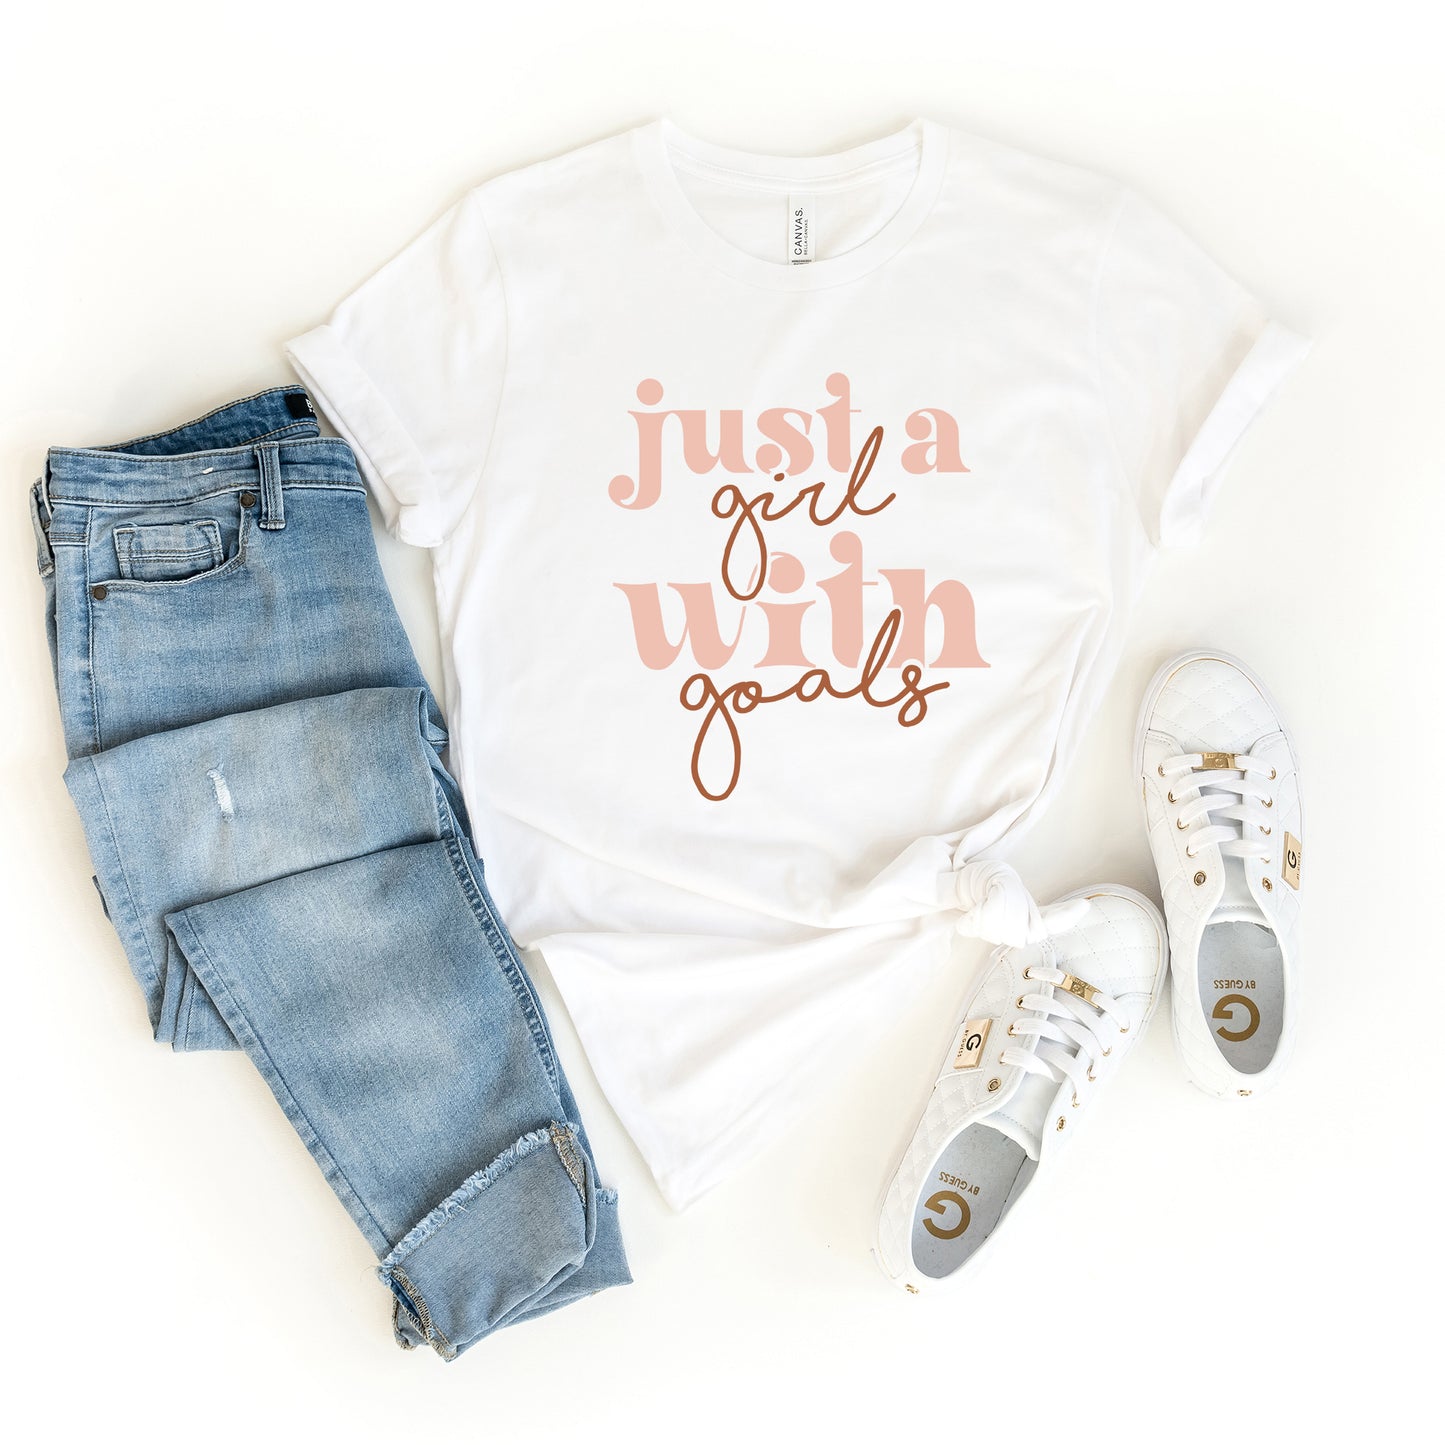 Just A Girl With Goals | Short Sleeve Crew Neck